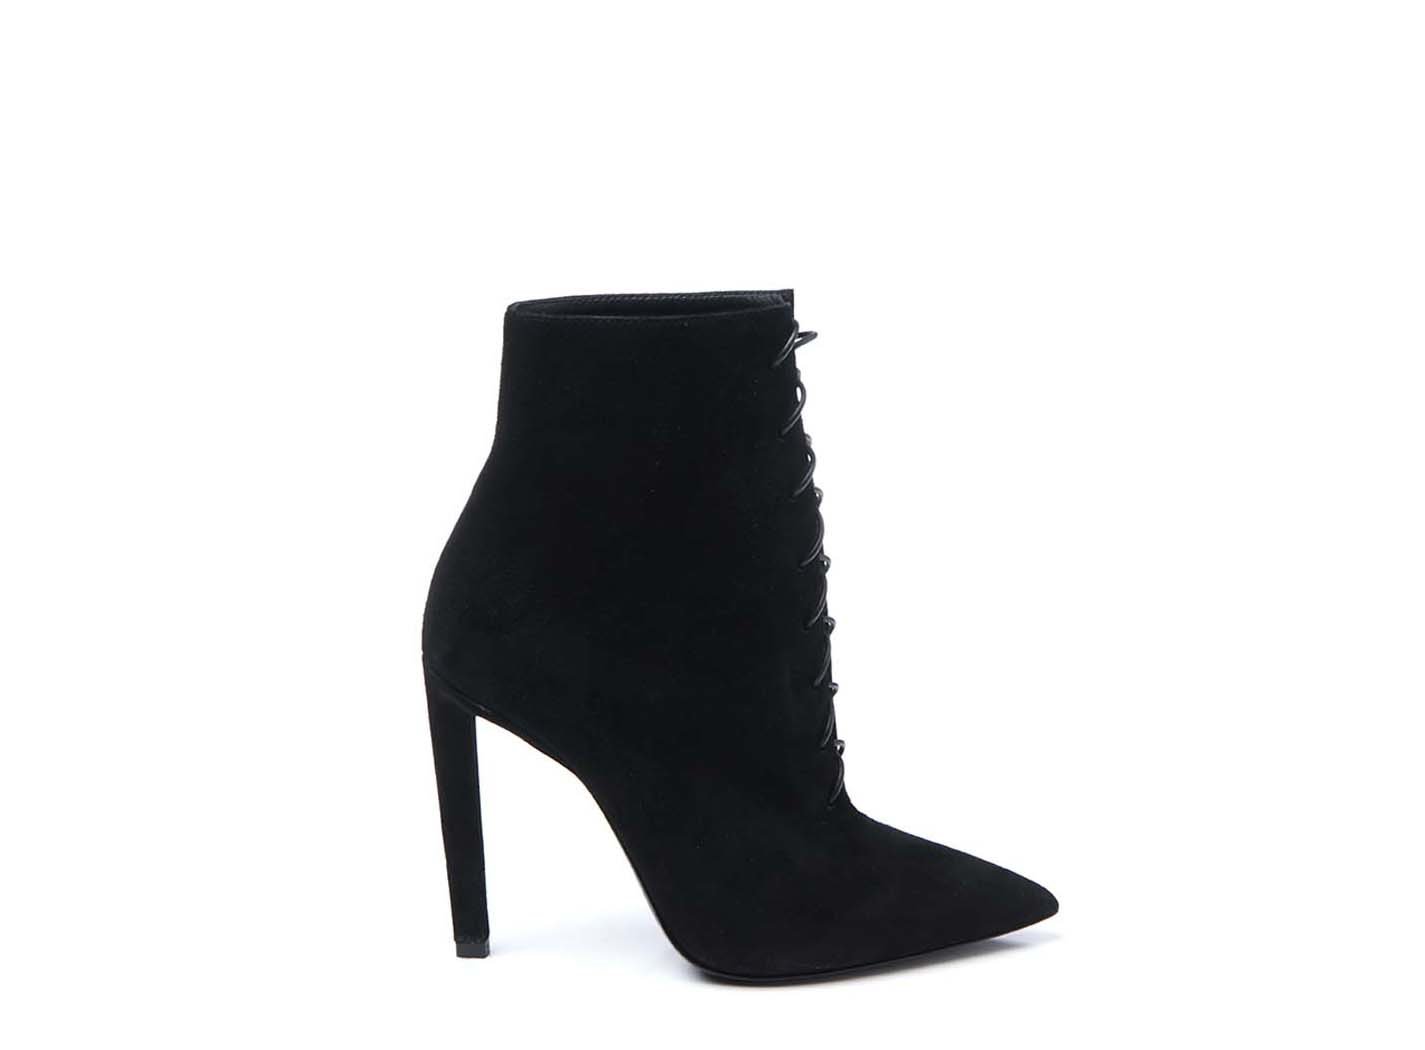 black leather ankle boots stiletto heel